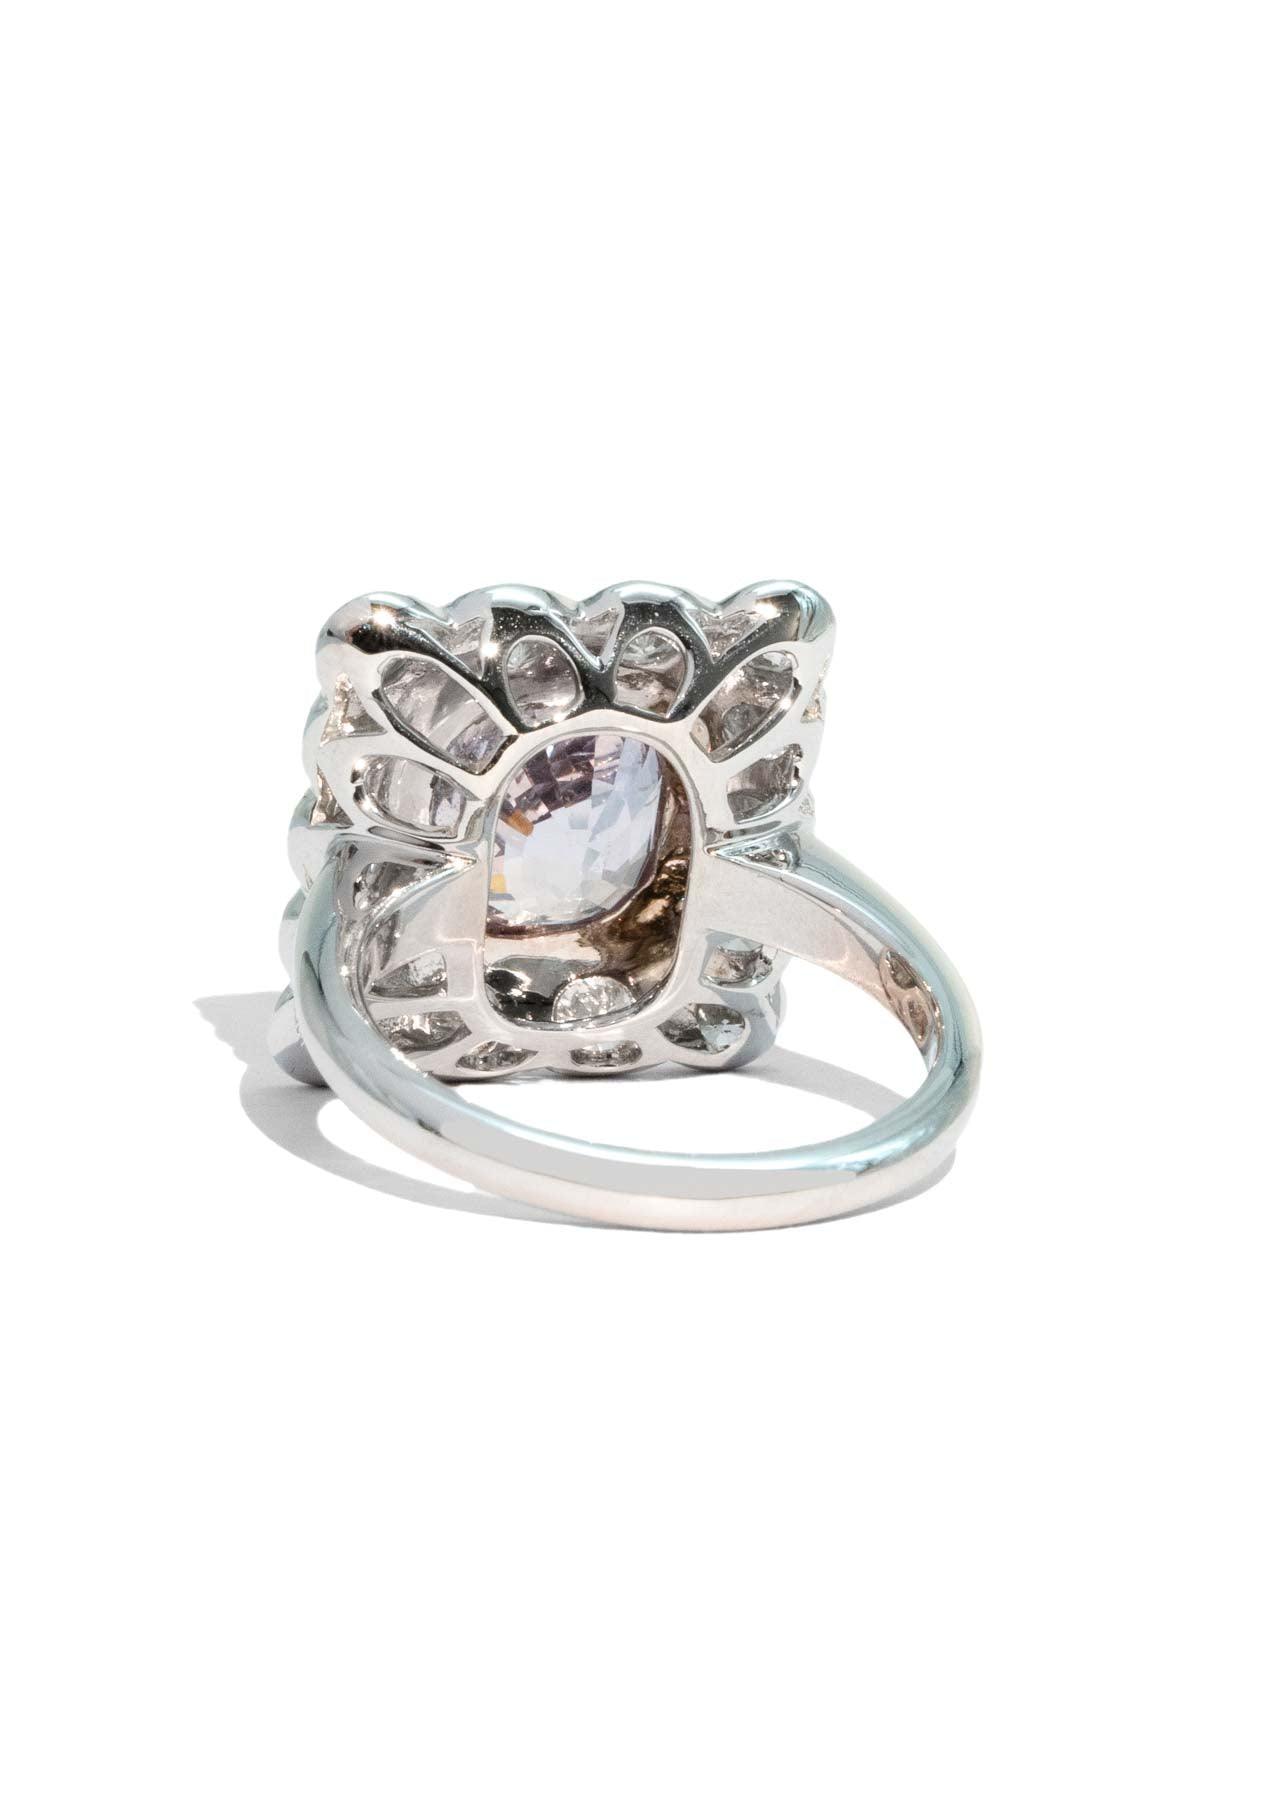 The Hazel Ring with 4.01ct Cushion Plum Spinel - Molten Store